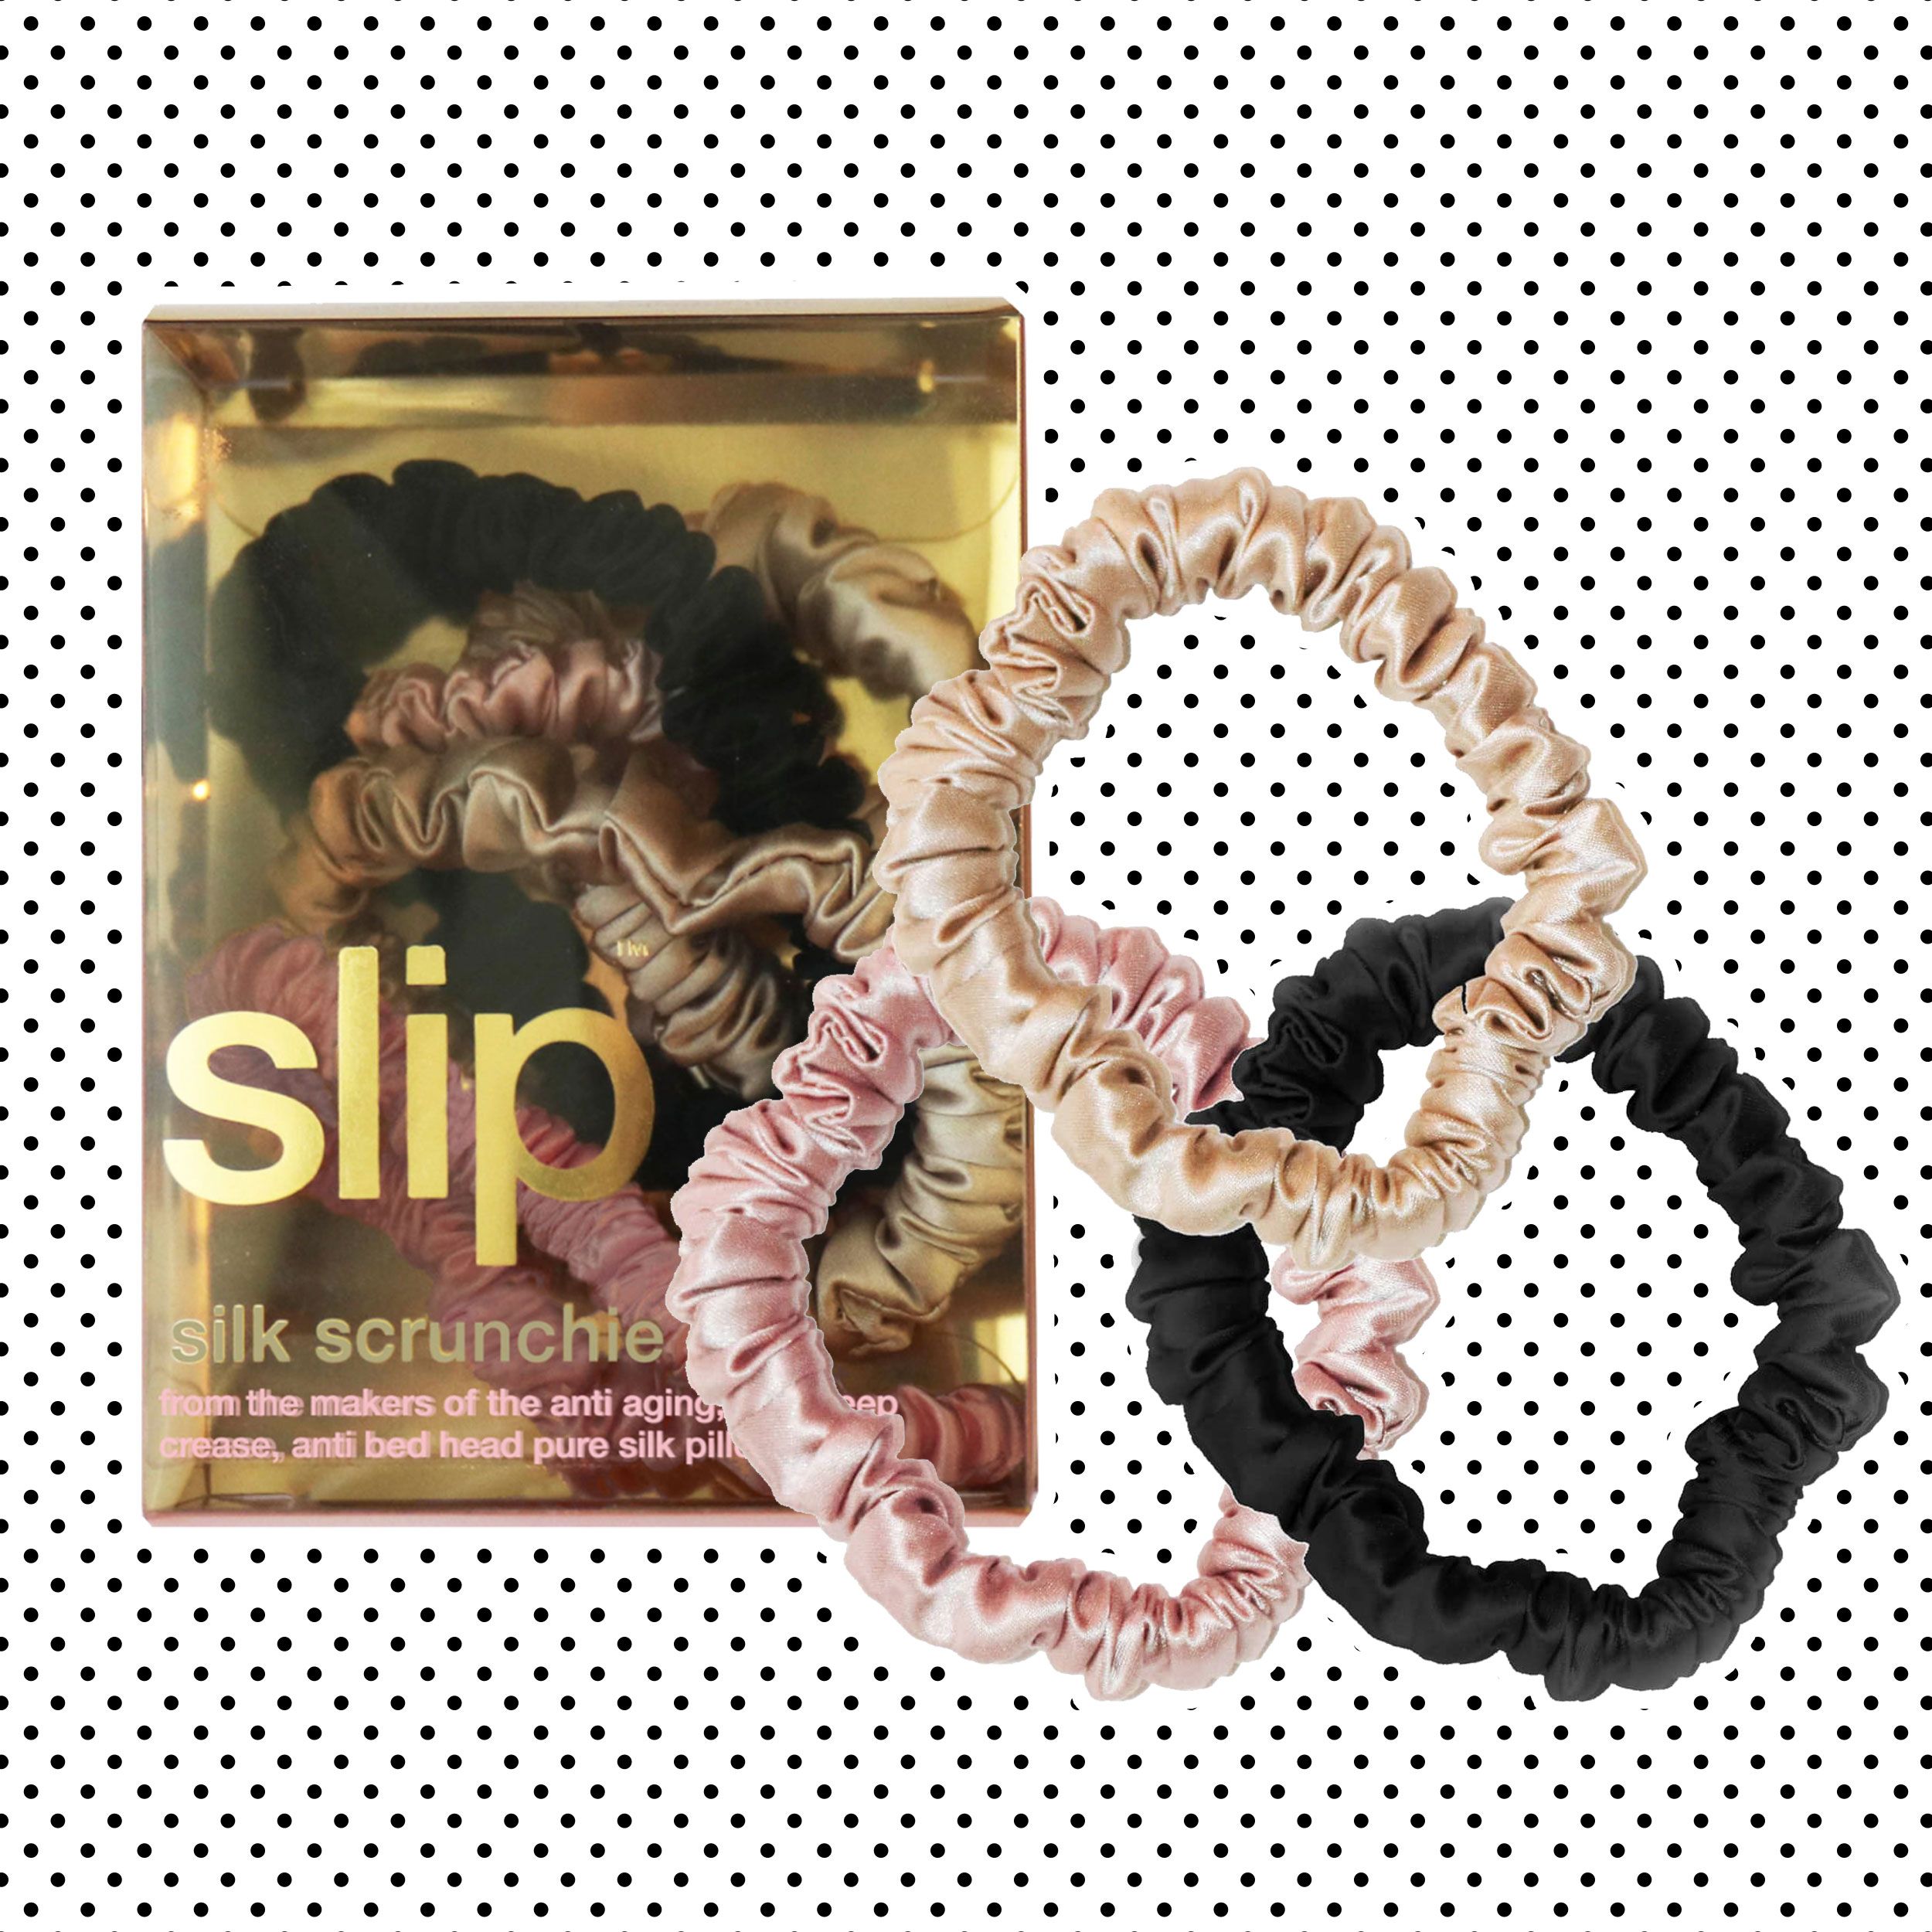 Bed Scrunchie Review - Does It Work?? 